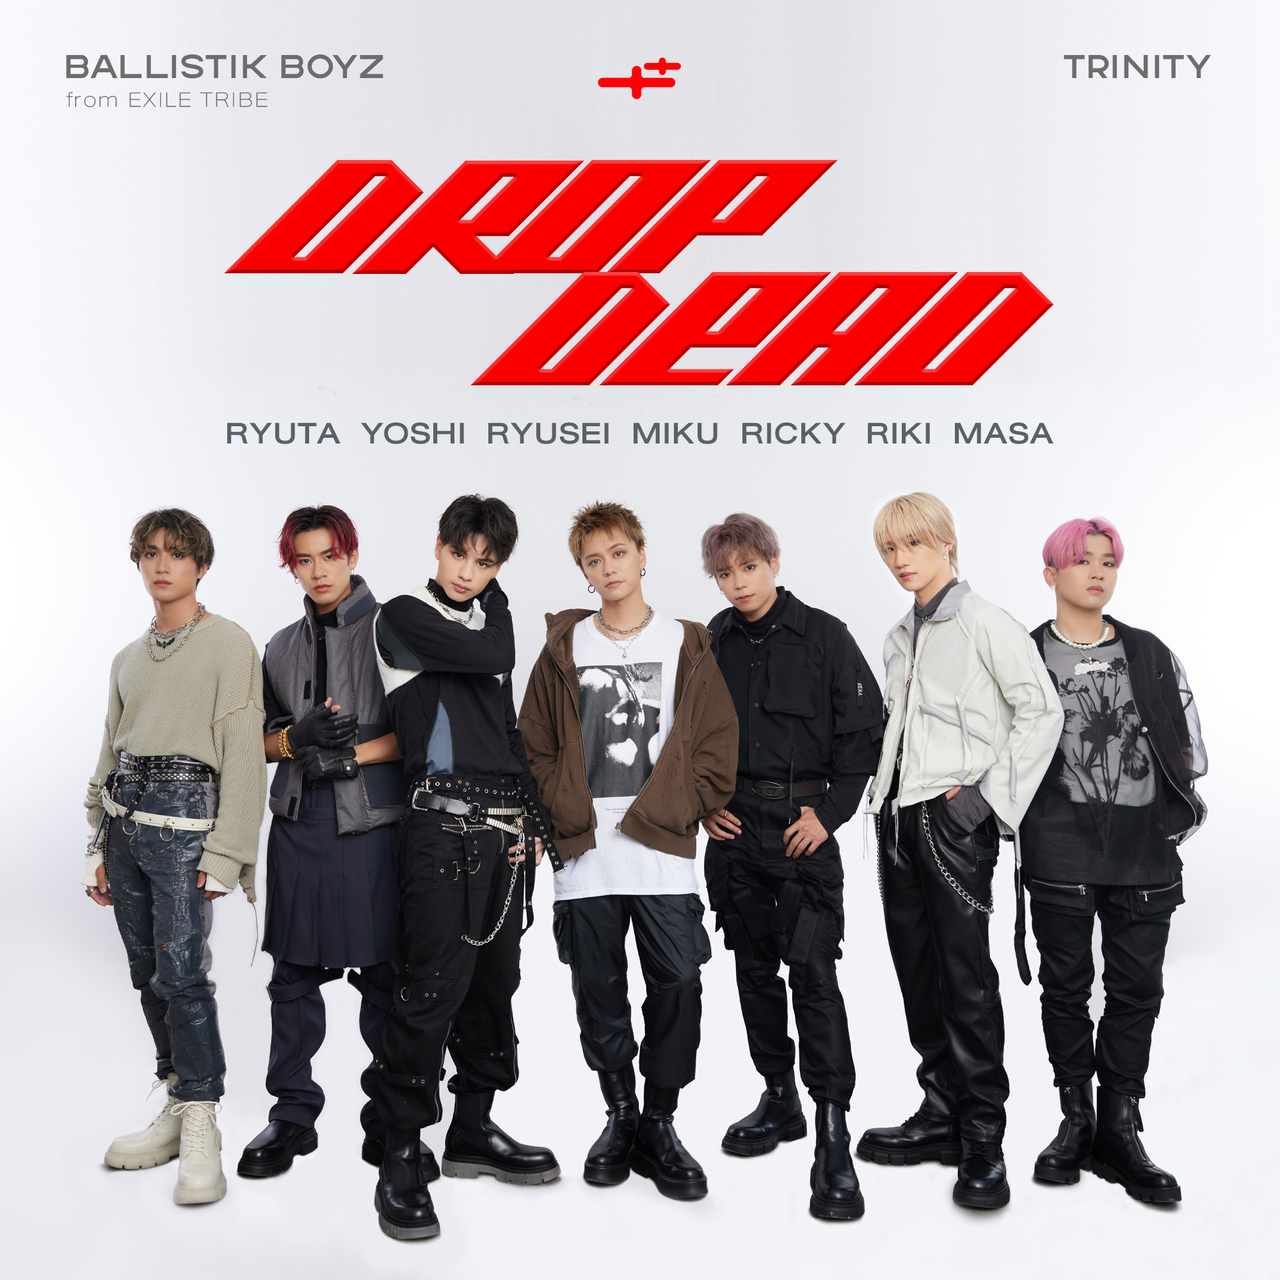 BALLISTIK BOYZ from EXILE TRIBE ft. featuring TRINITY Drop Dead cover artwork